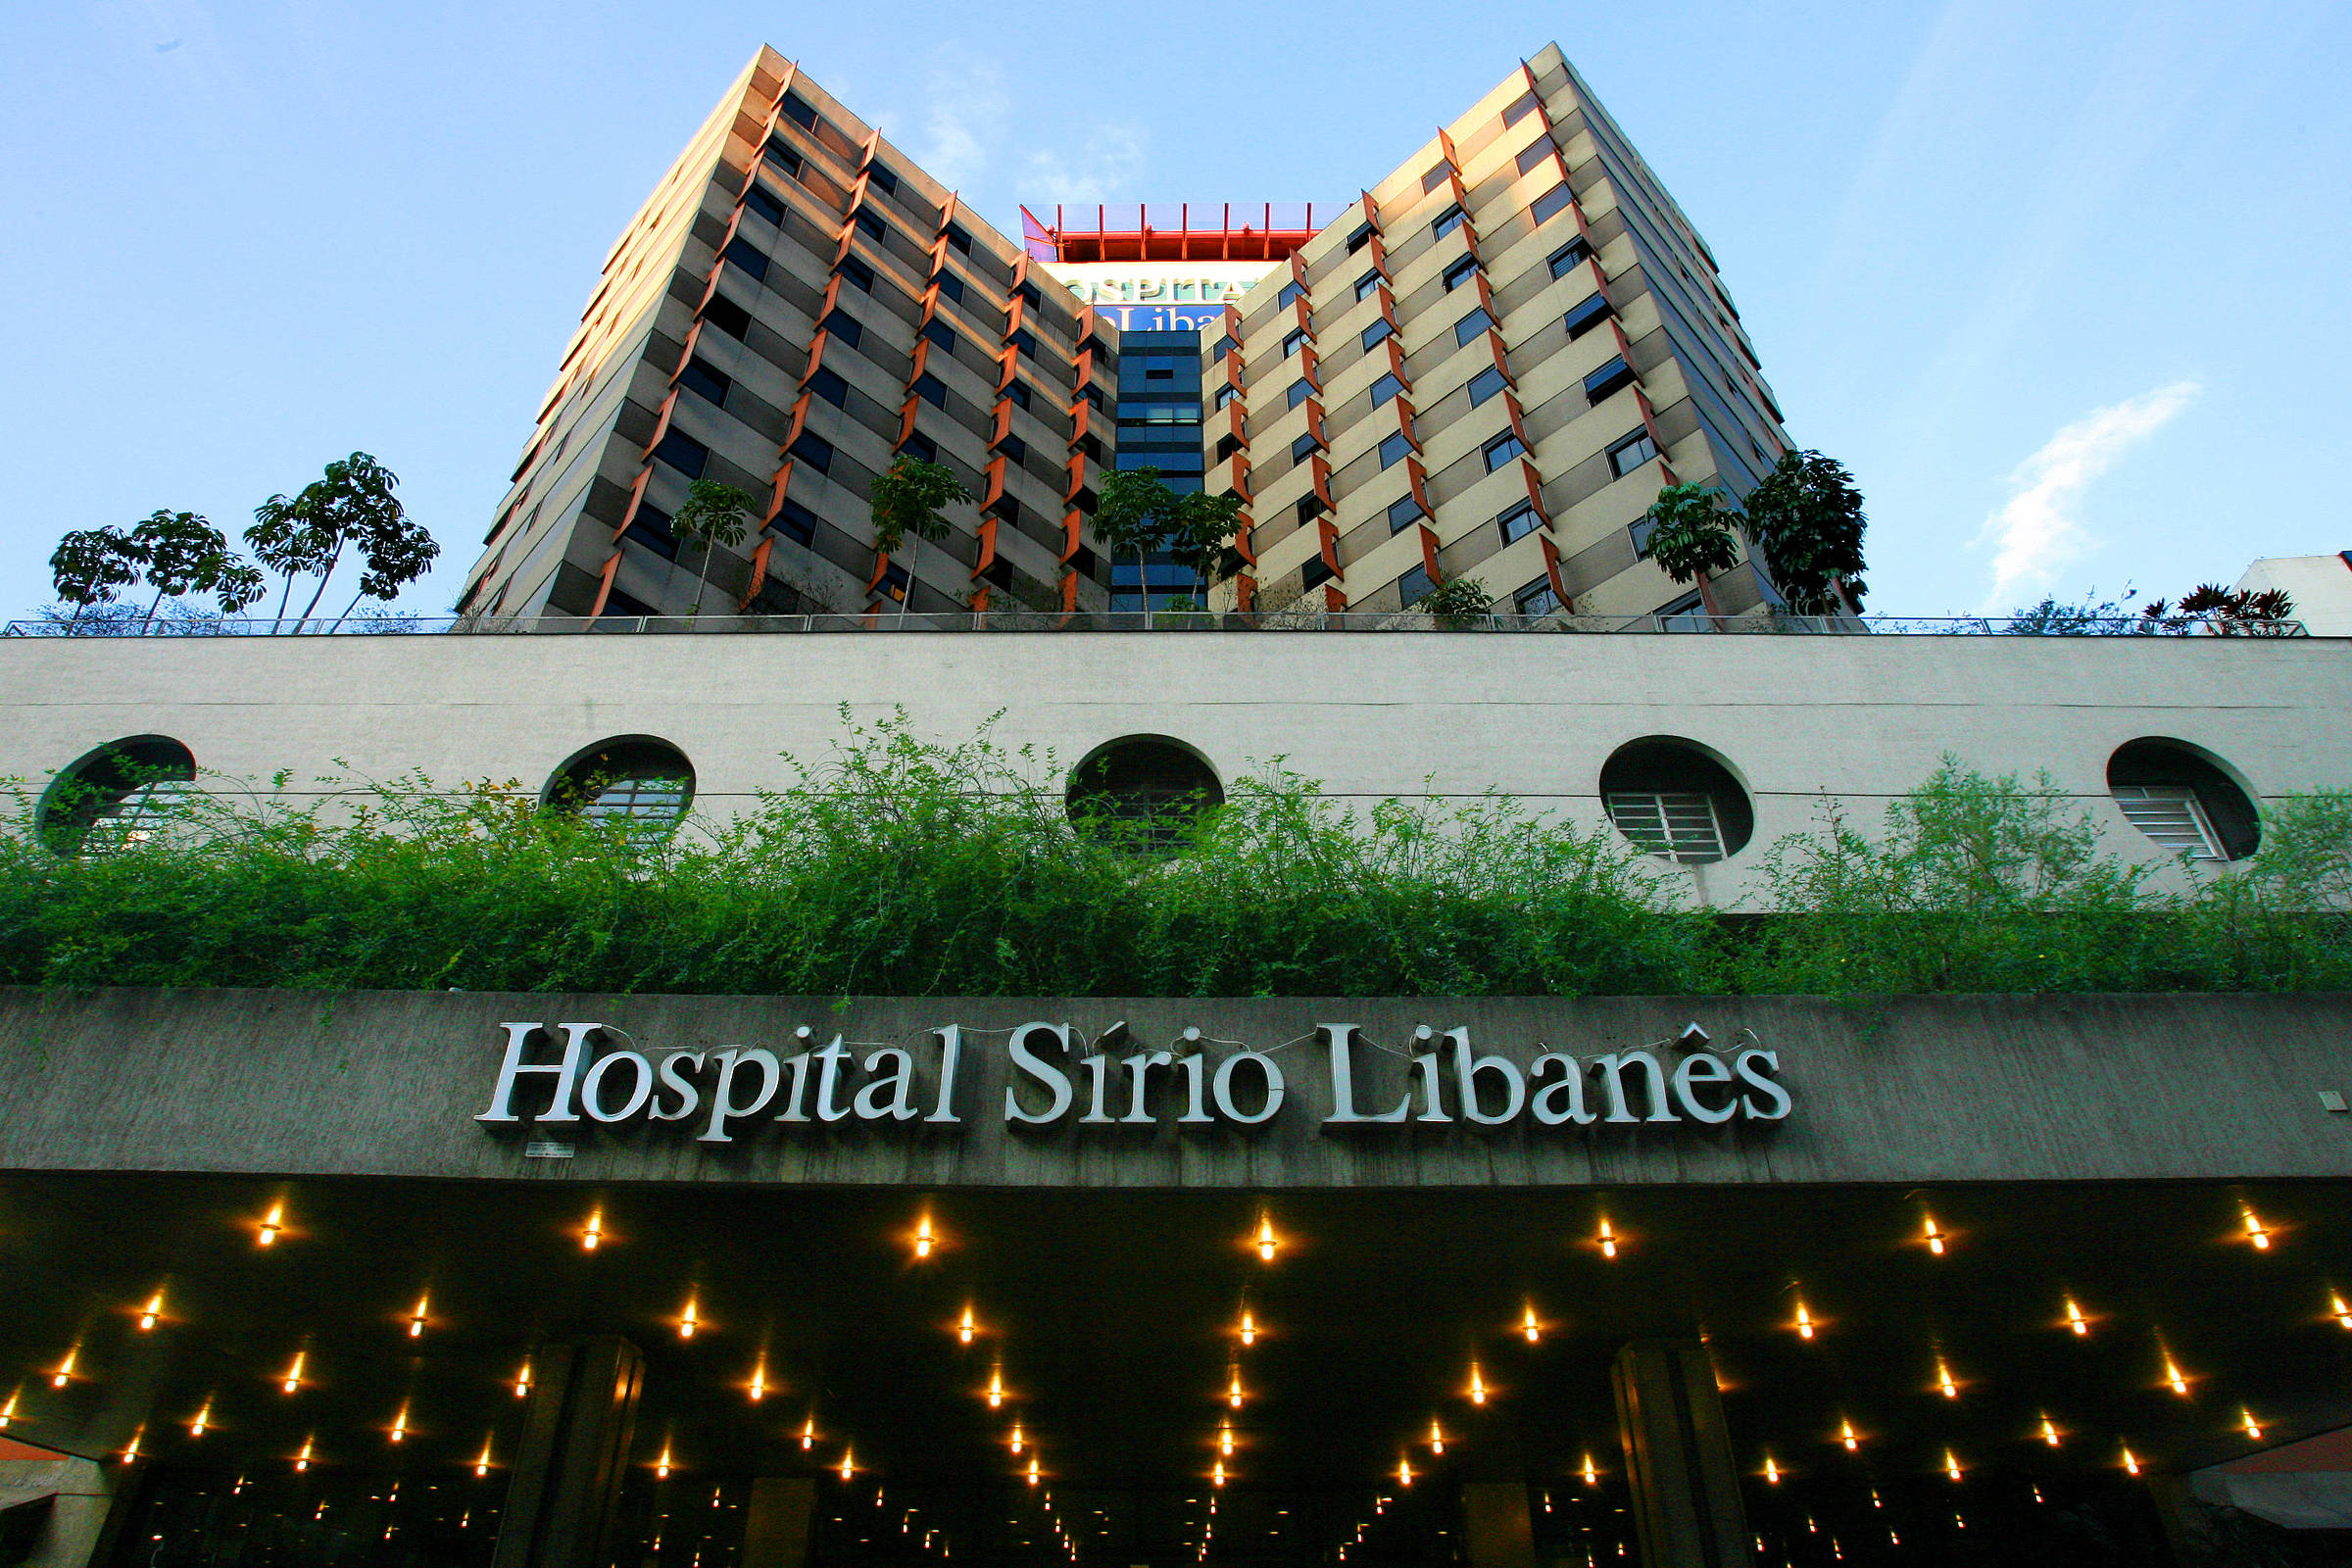 The Sírio-Libanês Hospital, located in São Paulo, announced on Friday, March 27th, that 90 of its employees had been removed for being infected with coronavirus. The hospital reported that the tests are conducted regularly among health staff and employees for the patients' safety.